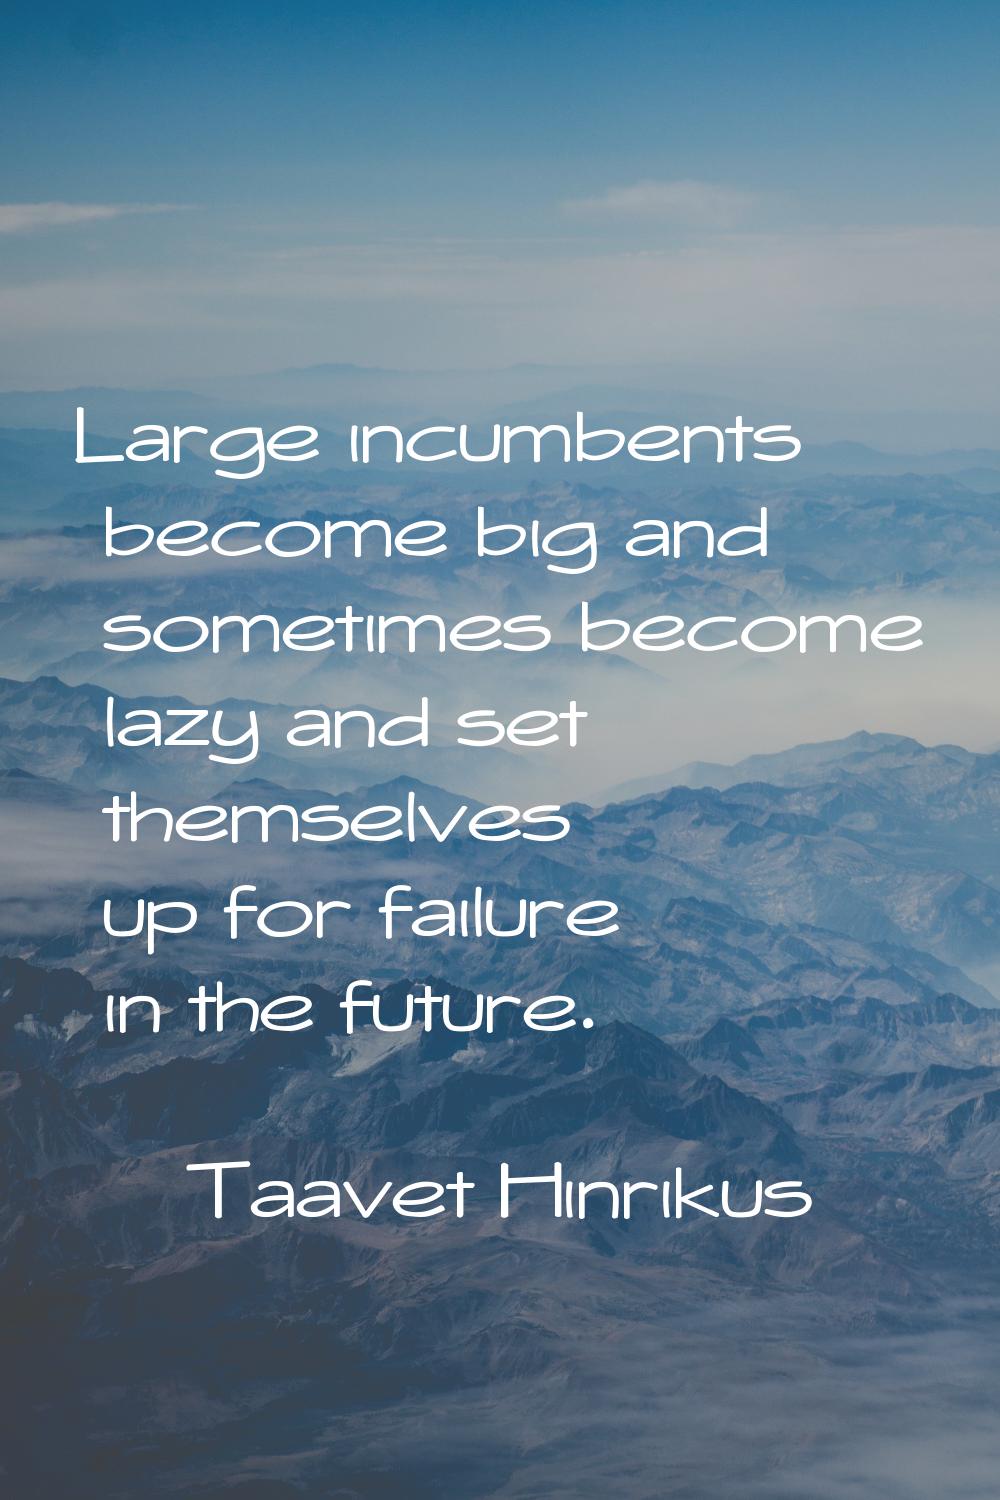 Large incumbents become big and sometimes become lazy and set themselves up for failure in the futu